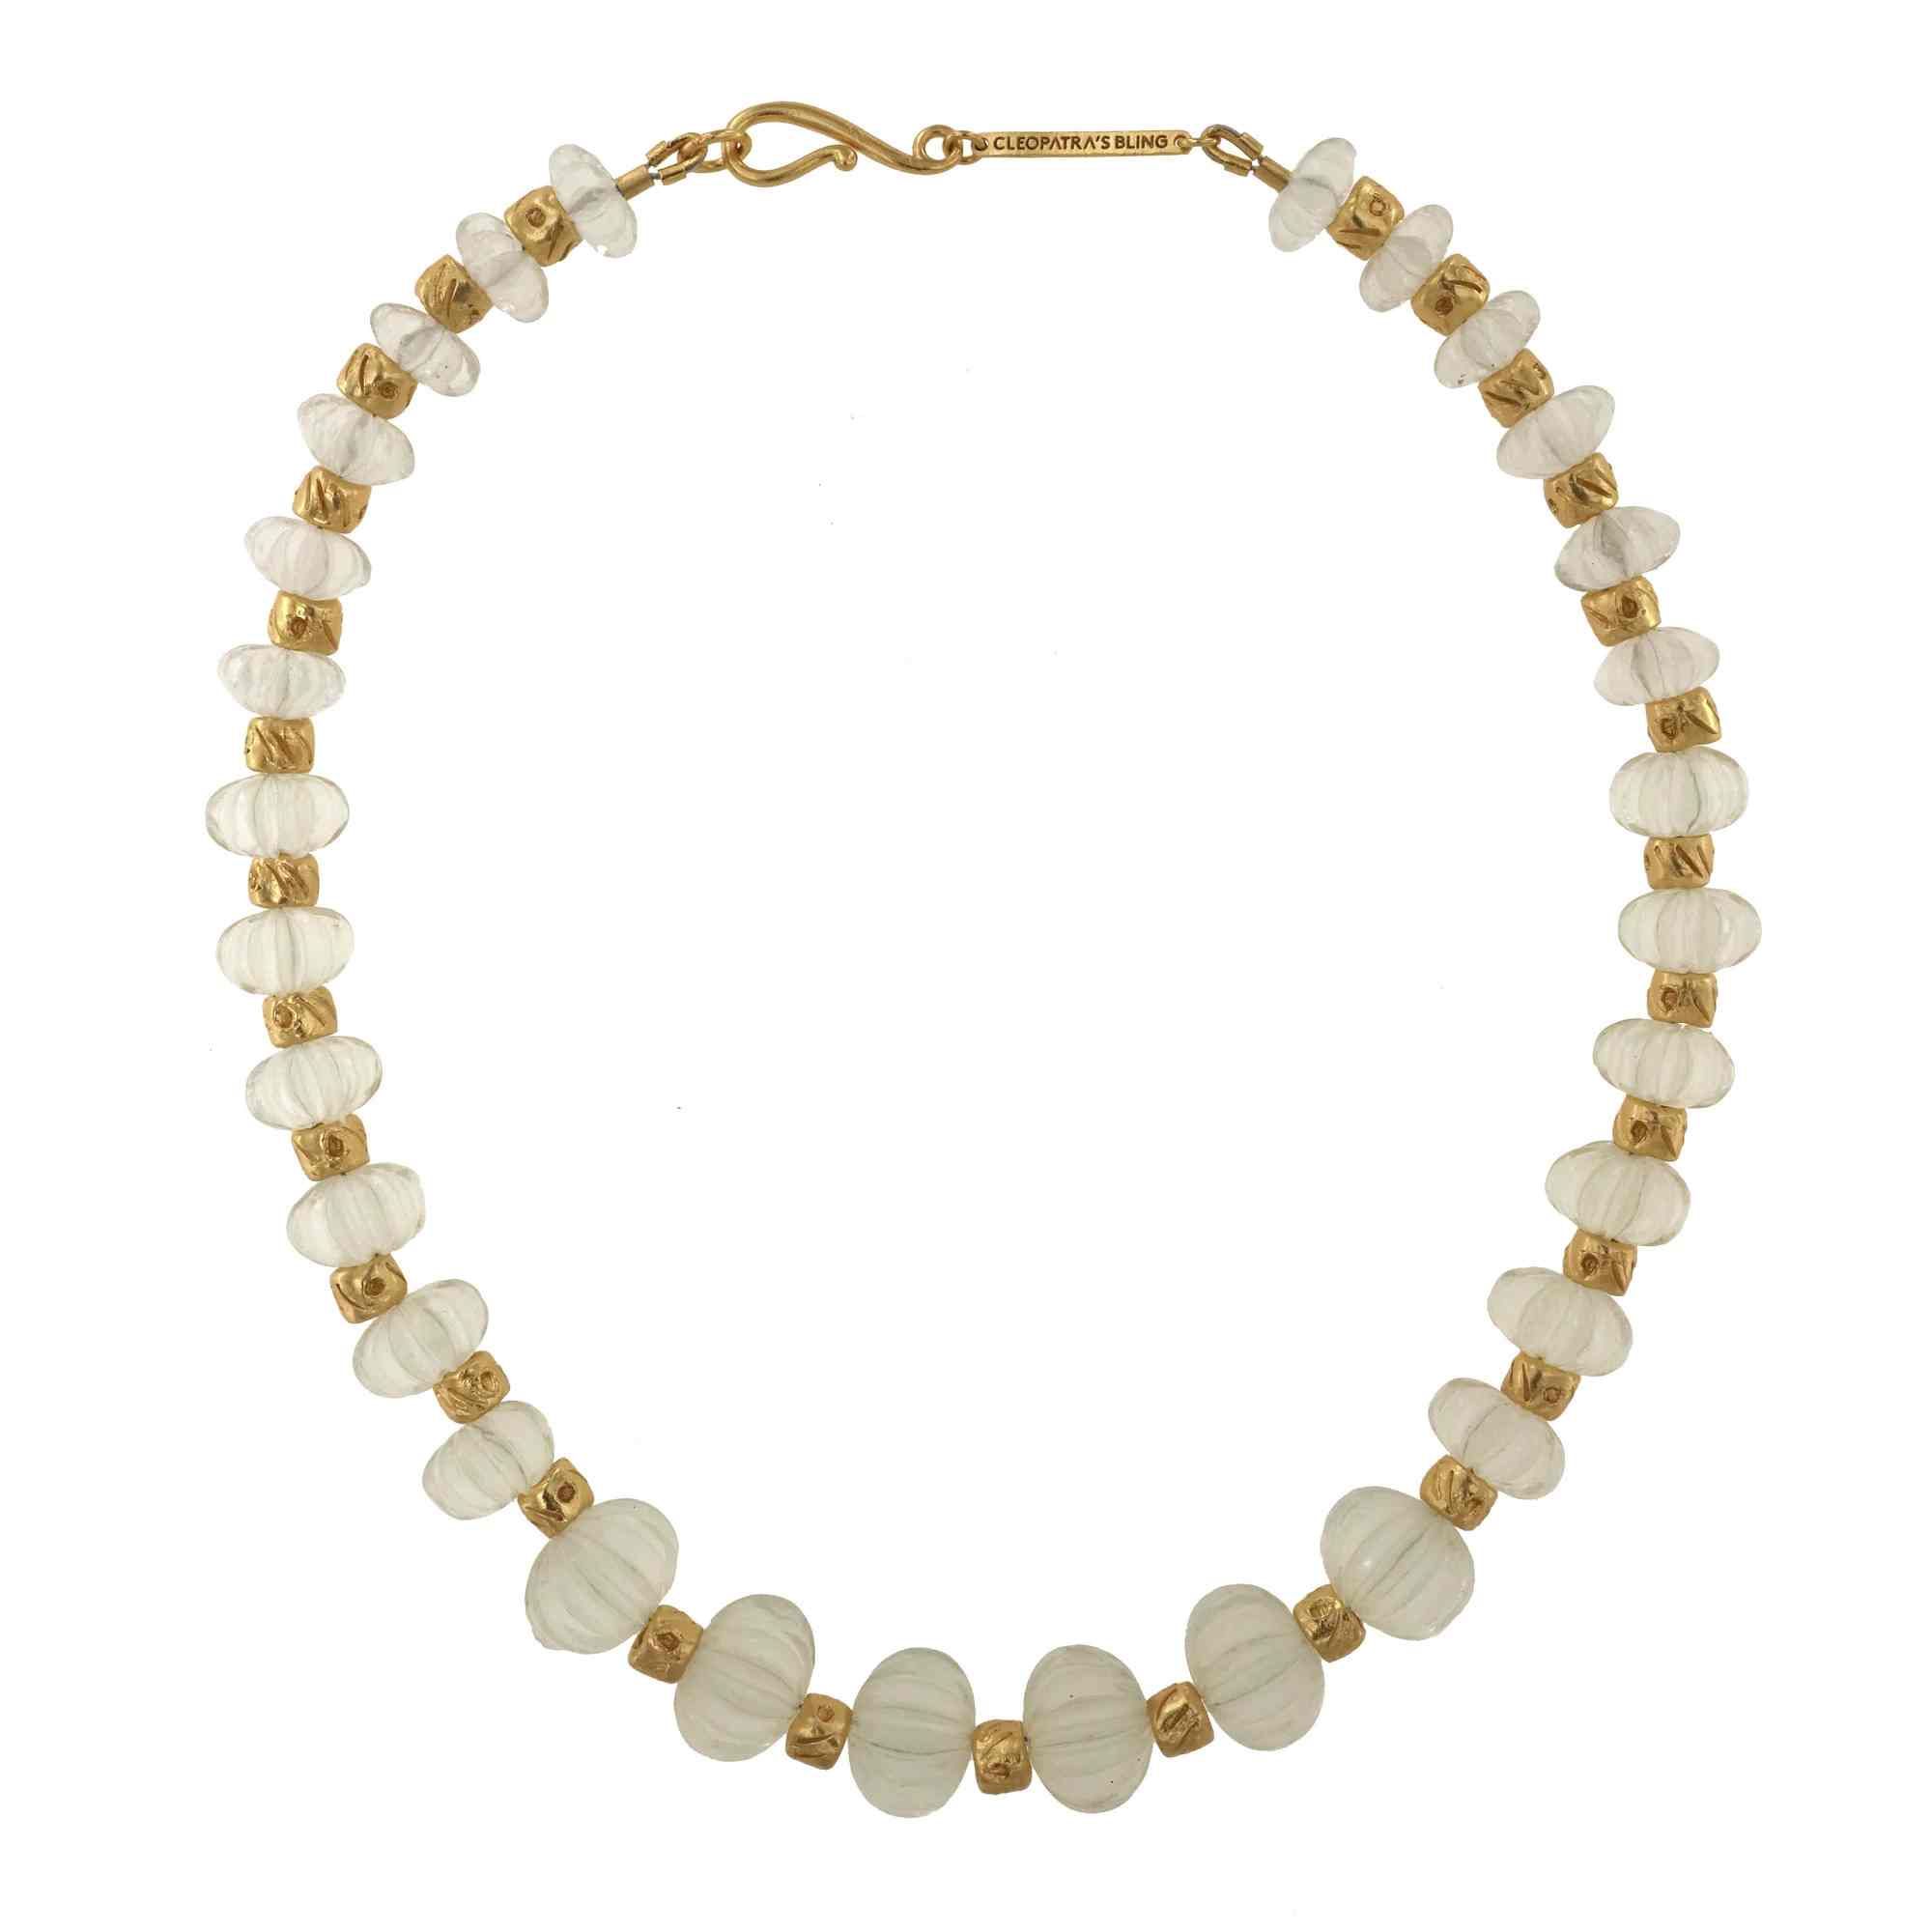 CO.NK.113 Necklace – 18K Gold Plated